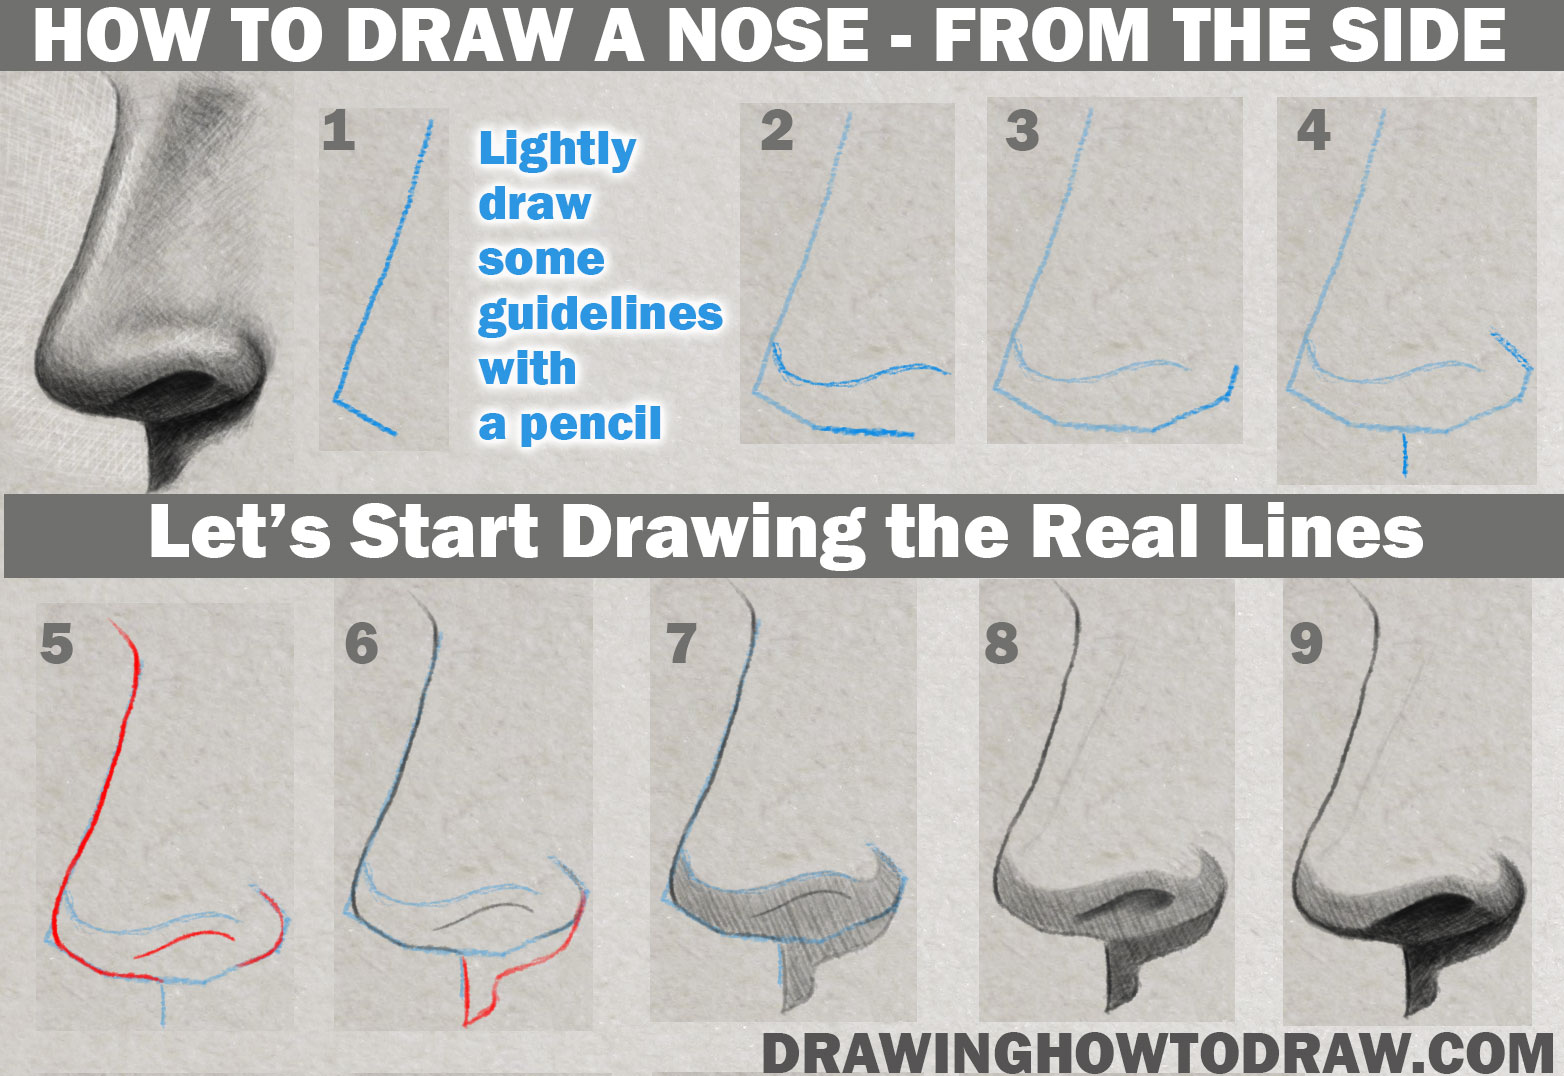 Learn How to Draw and Shade a Realistic Nose (Side View) in Pencil or Graphite Simple Steps Lesson